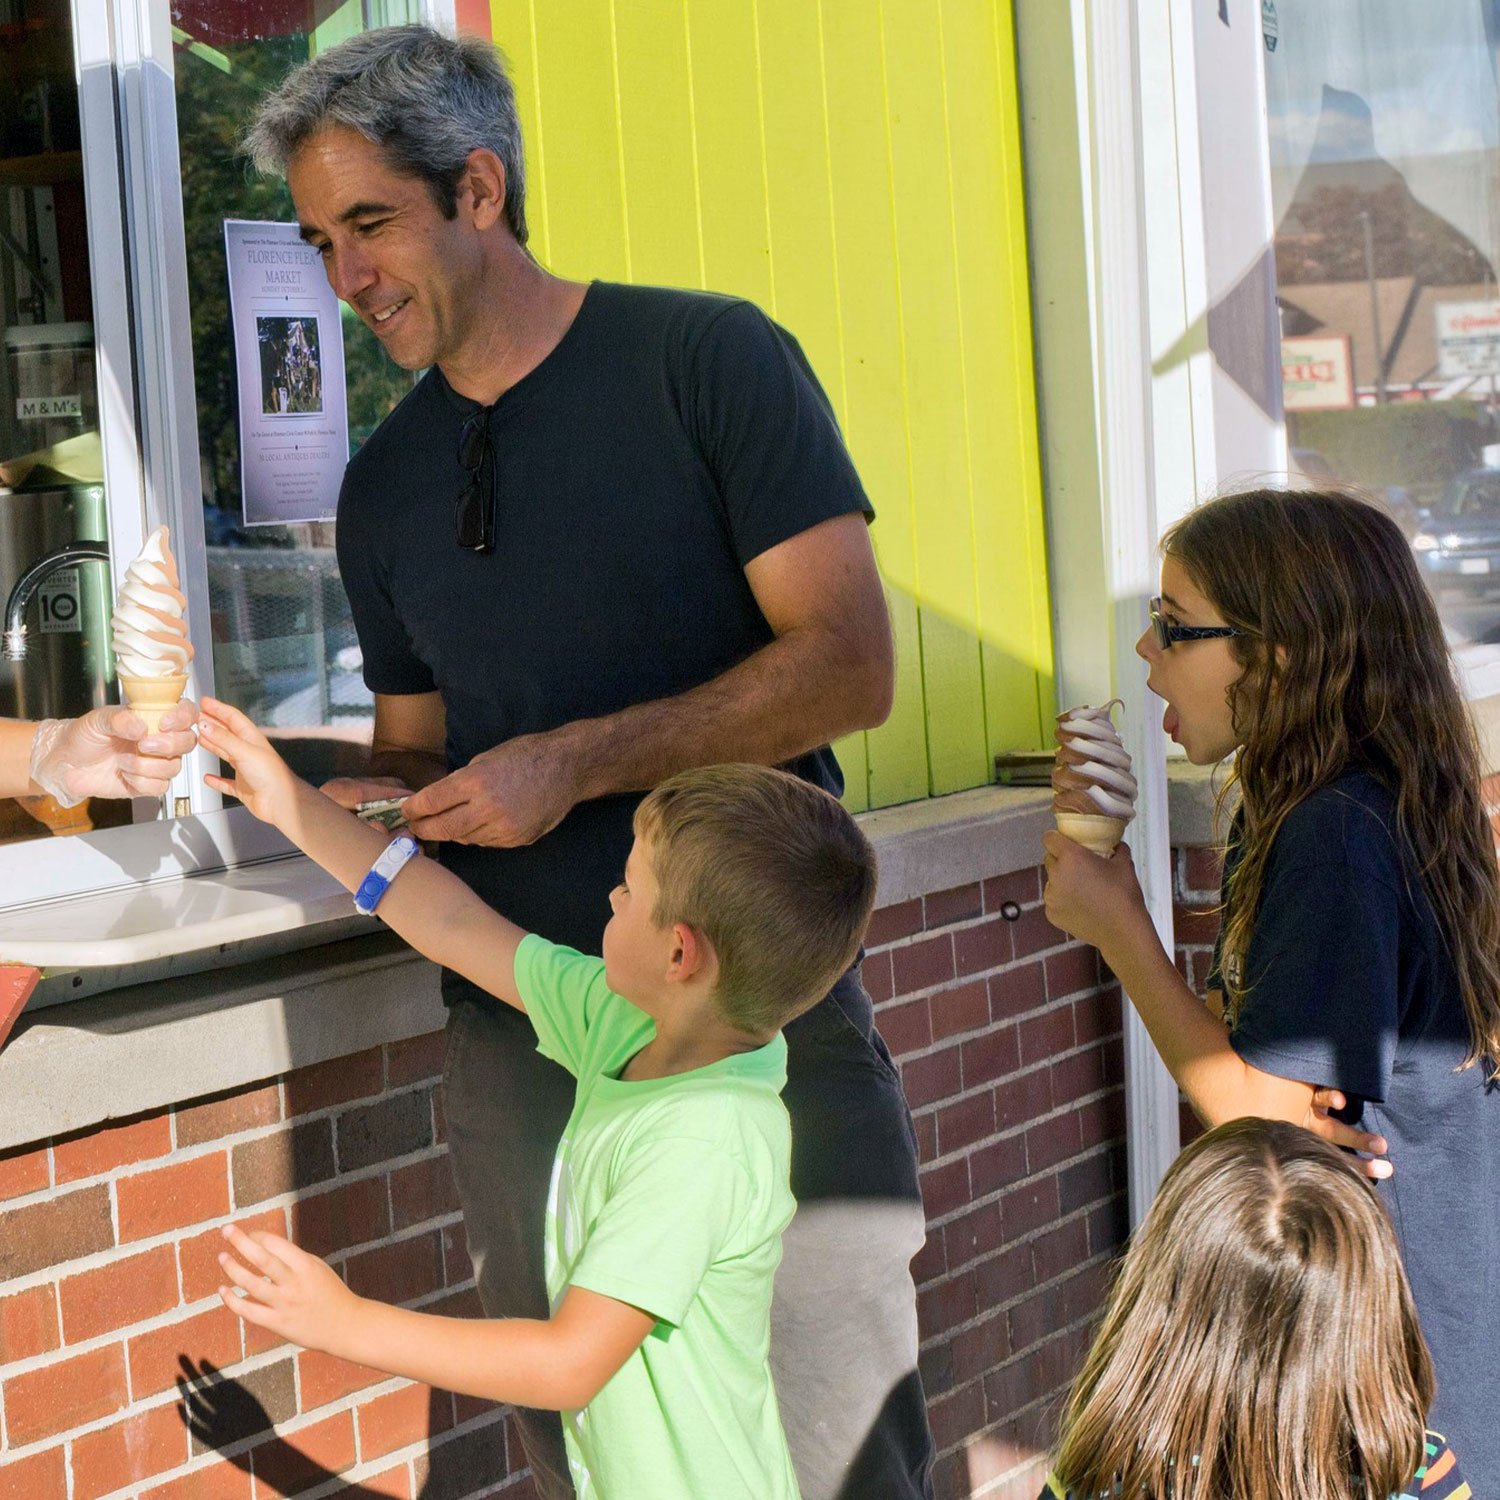  dad in a black t shirt takes his two daughters and son out for ice cream cones on a summer afternoon  